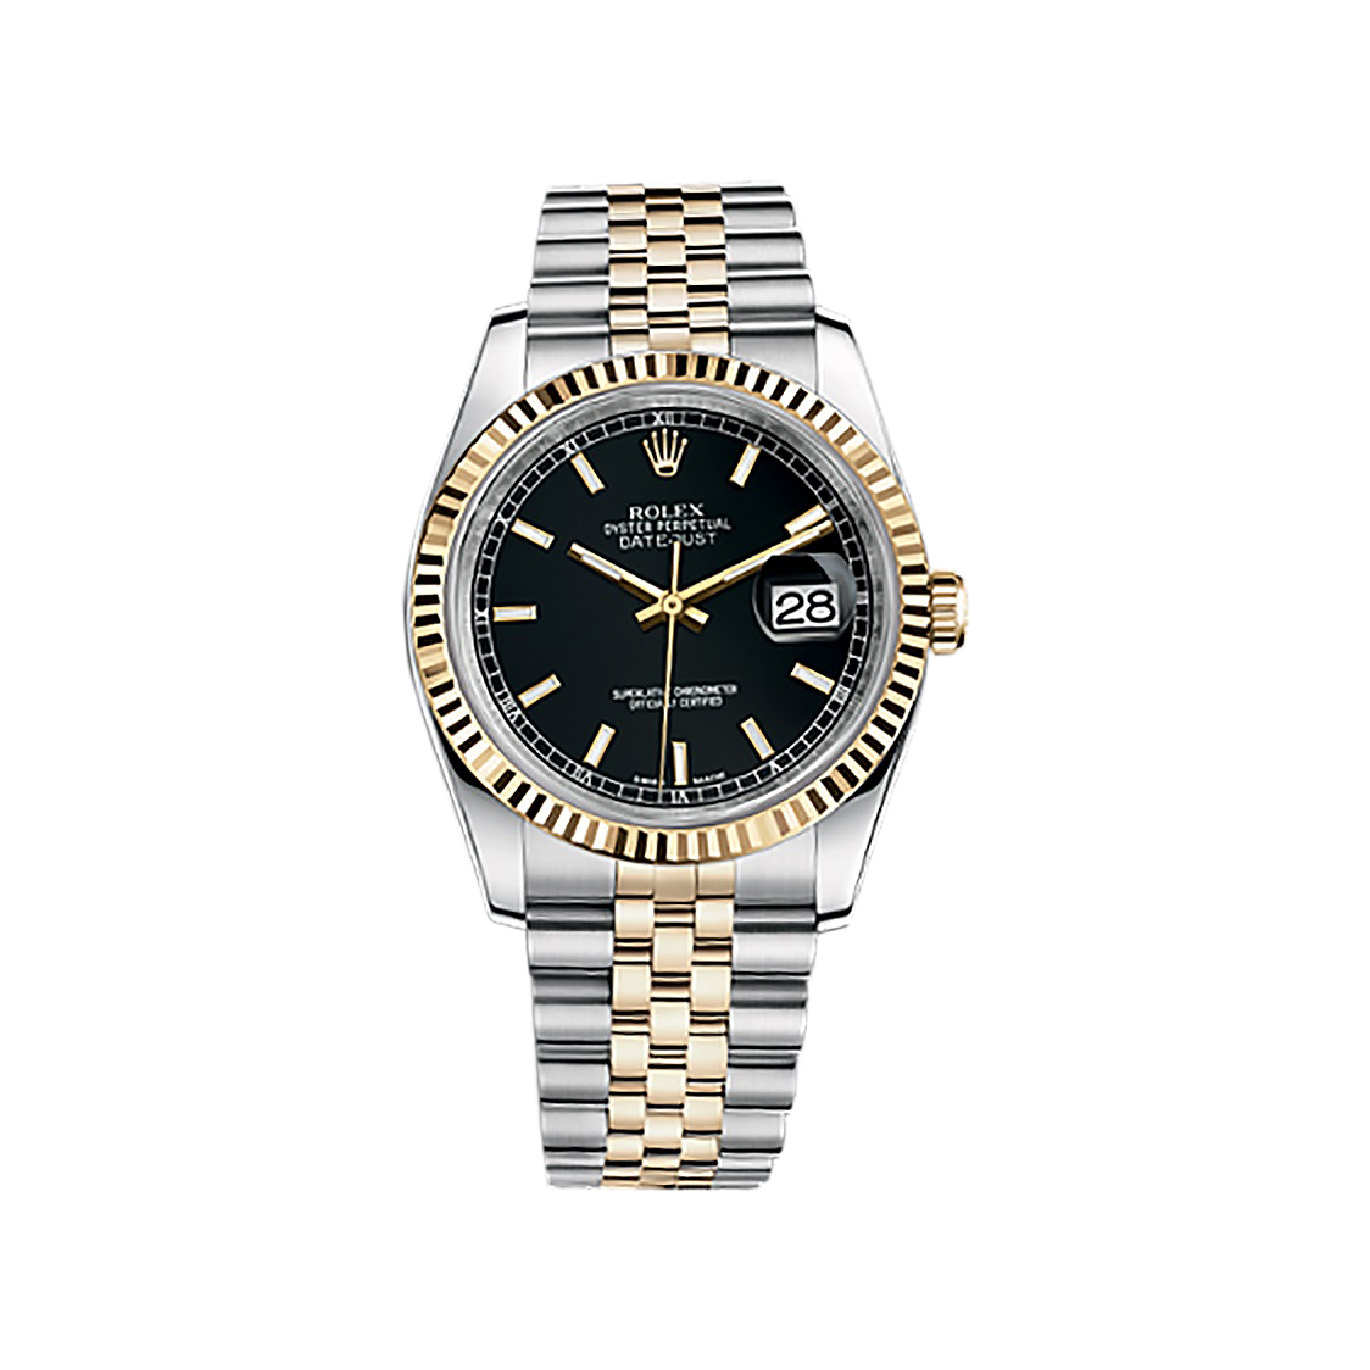 Datejust 36 116233 Gold & Stainless Steel Watch (Black)